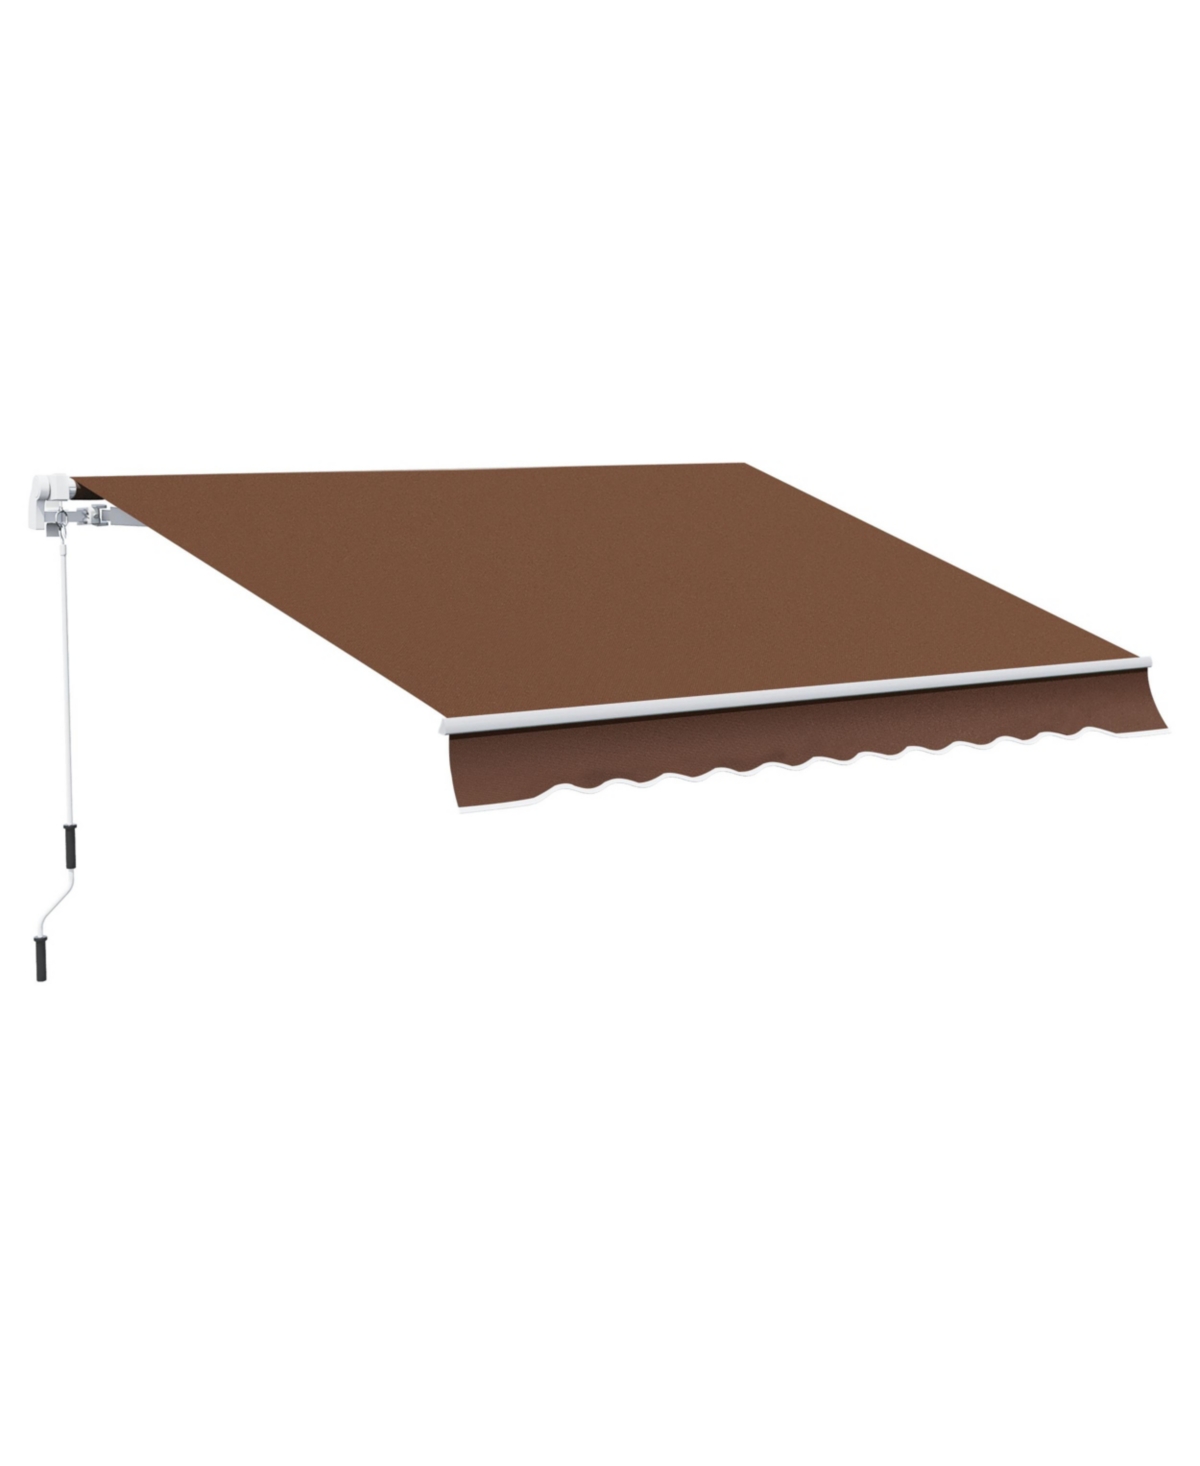 12' x 10' Retractable Awning Patio Awnings Sun Shade Shelter with Manual Crank Handle, 280g/m&#xB2; Uv & Water-Resistant Fabric and Aluminum